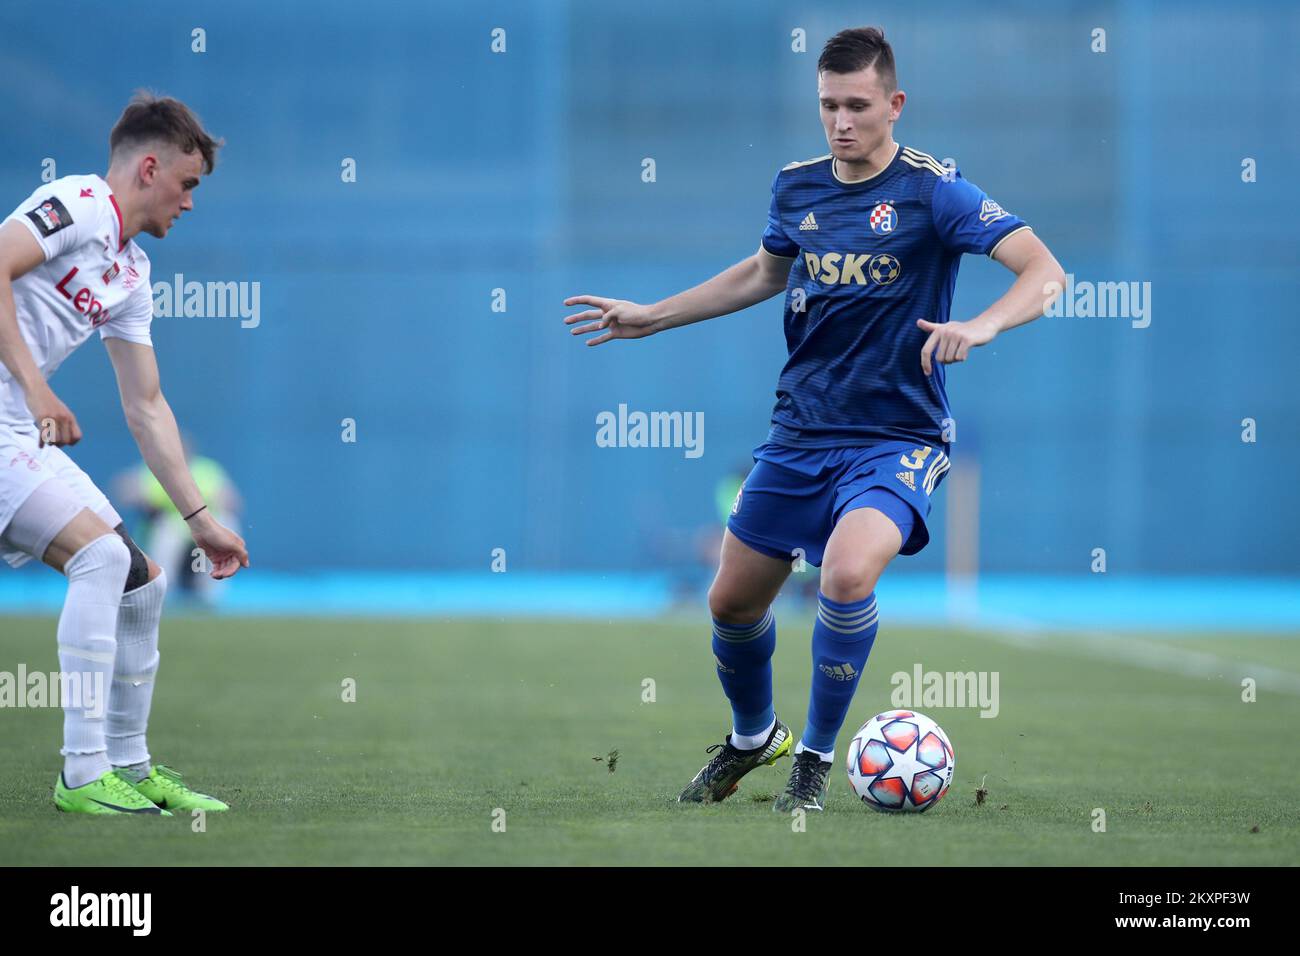 Daniel Stefulj of Dinamo Zagreb controls a ball during UEFA Champions League First Qualifying Round match between GNK Dinamo Zagreb and Valur at Maksimir Stadium in Zagreb, Croatia on July 7, 2021. Photo: Igor Kralj/PIXSELL Stock Photo